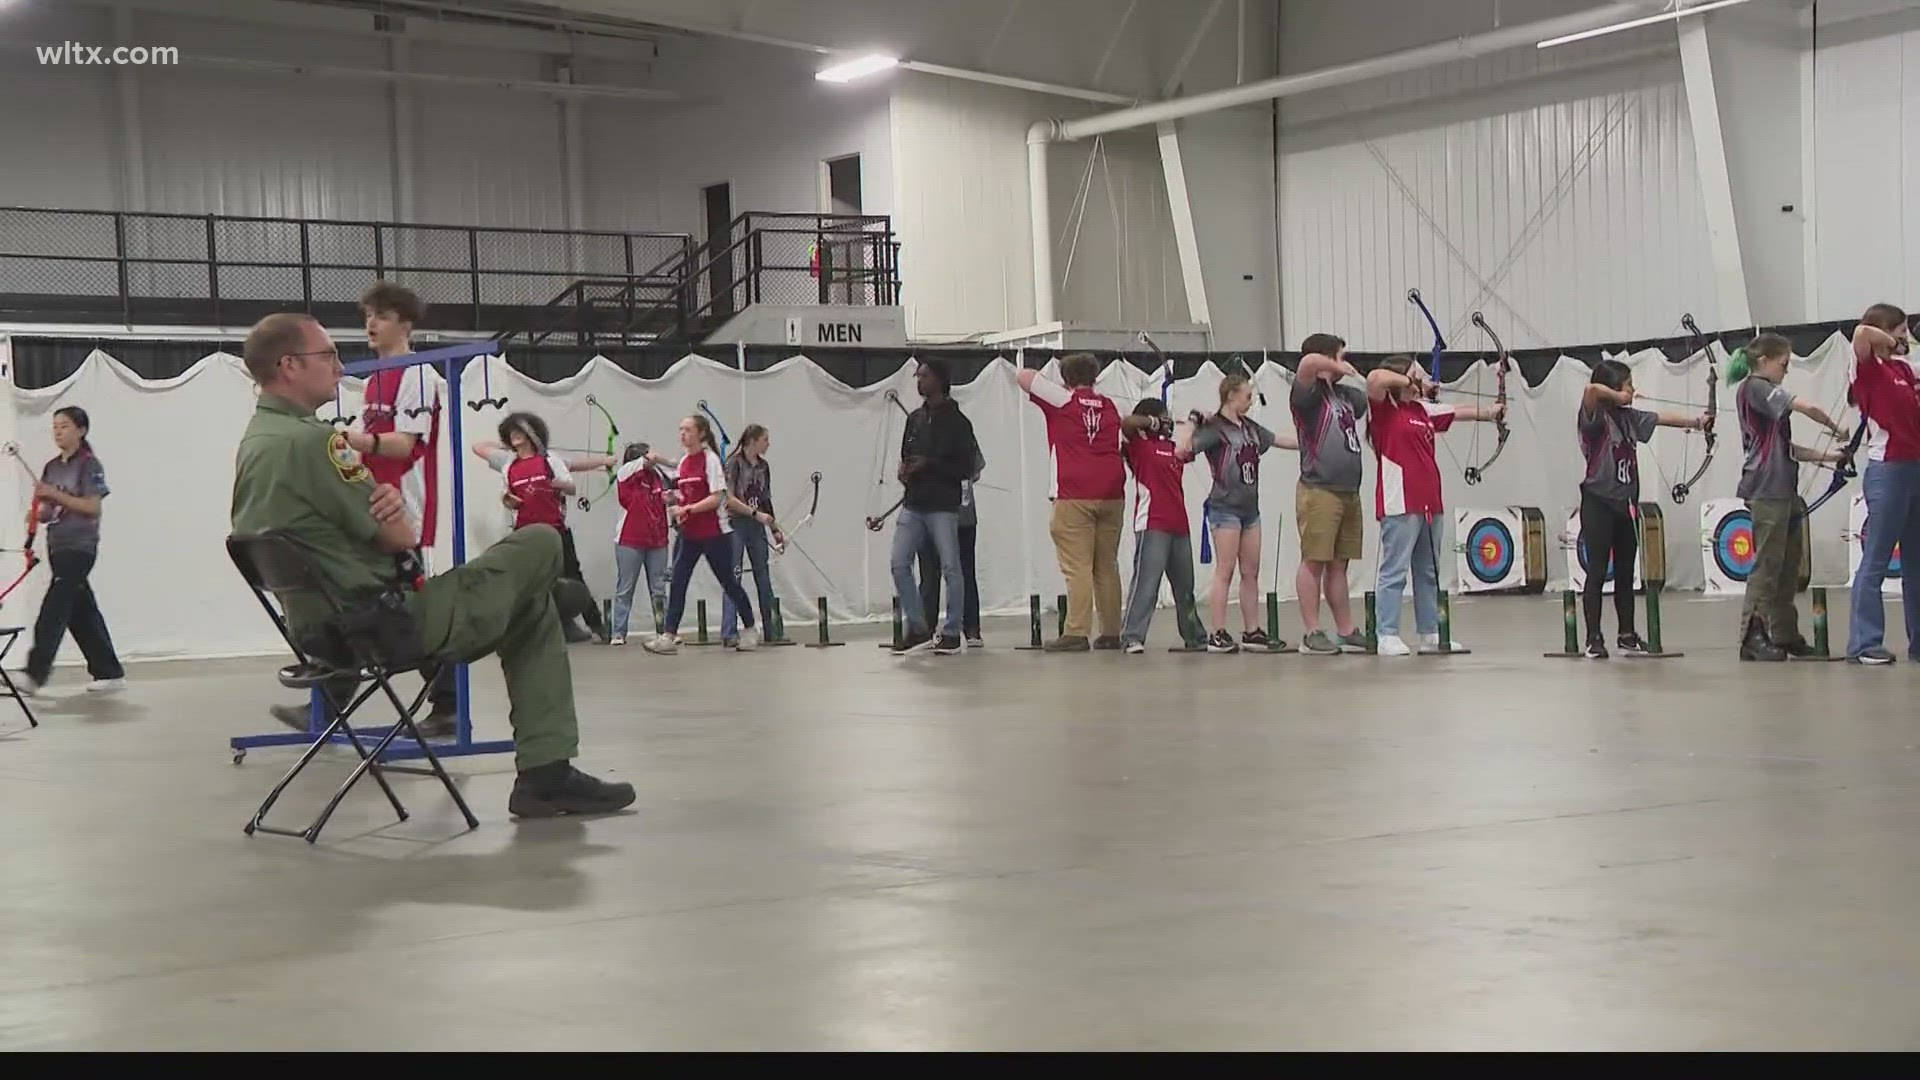 The bow and arrow was the tools being used at the state archery tournament which was held at the Cantey Building under the direction of SCDNR.